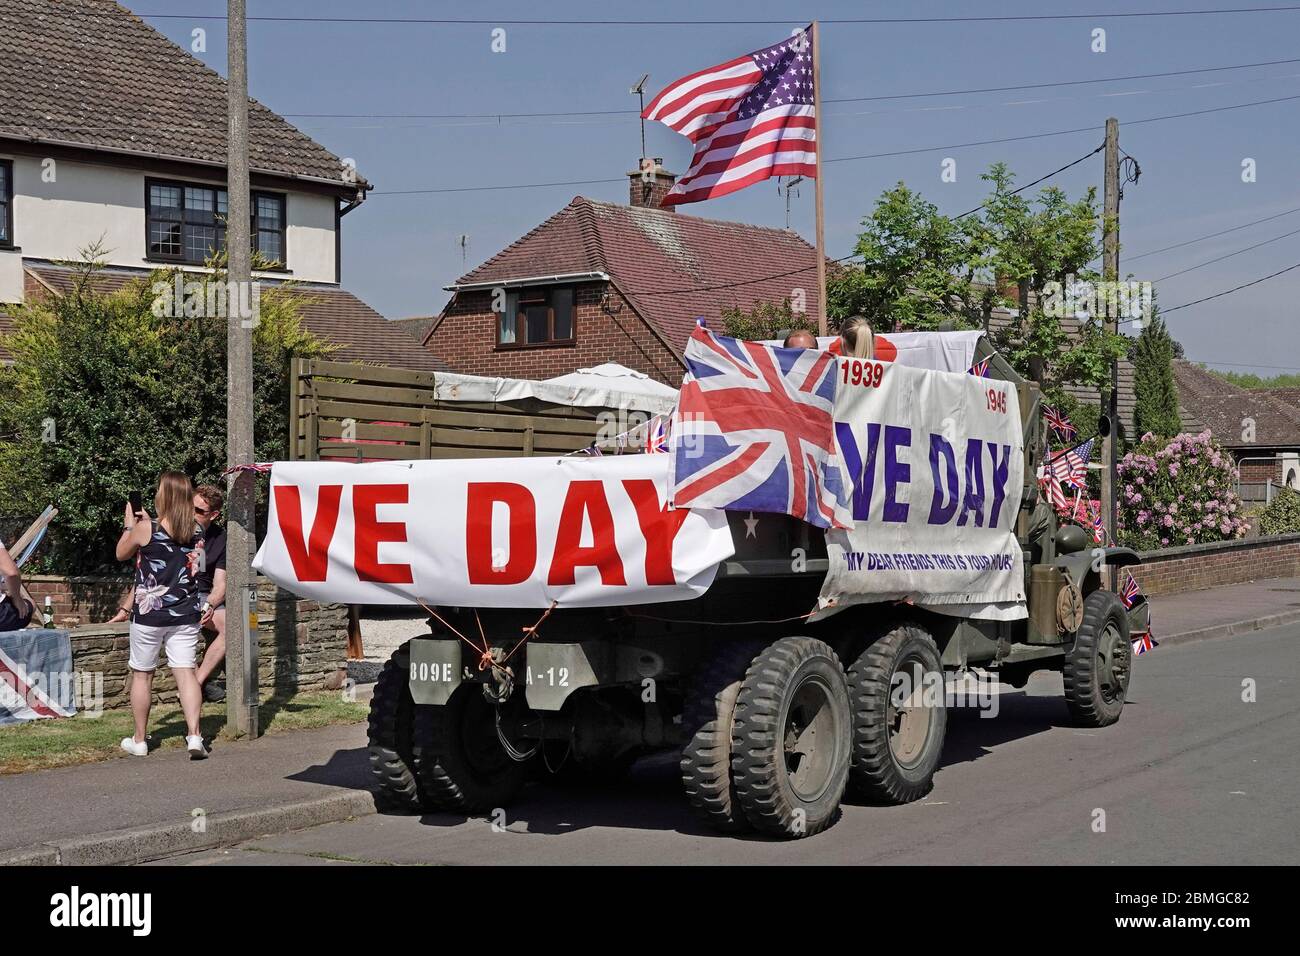 USA preserved military truck decorated VE day Union Jack & American Stars & Stripes flag calling at 2020 street celebrations parties Essex England UK Stock Photo